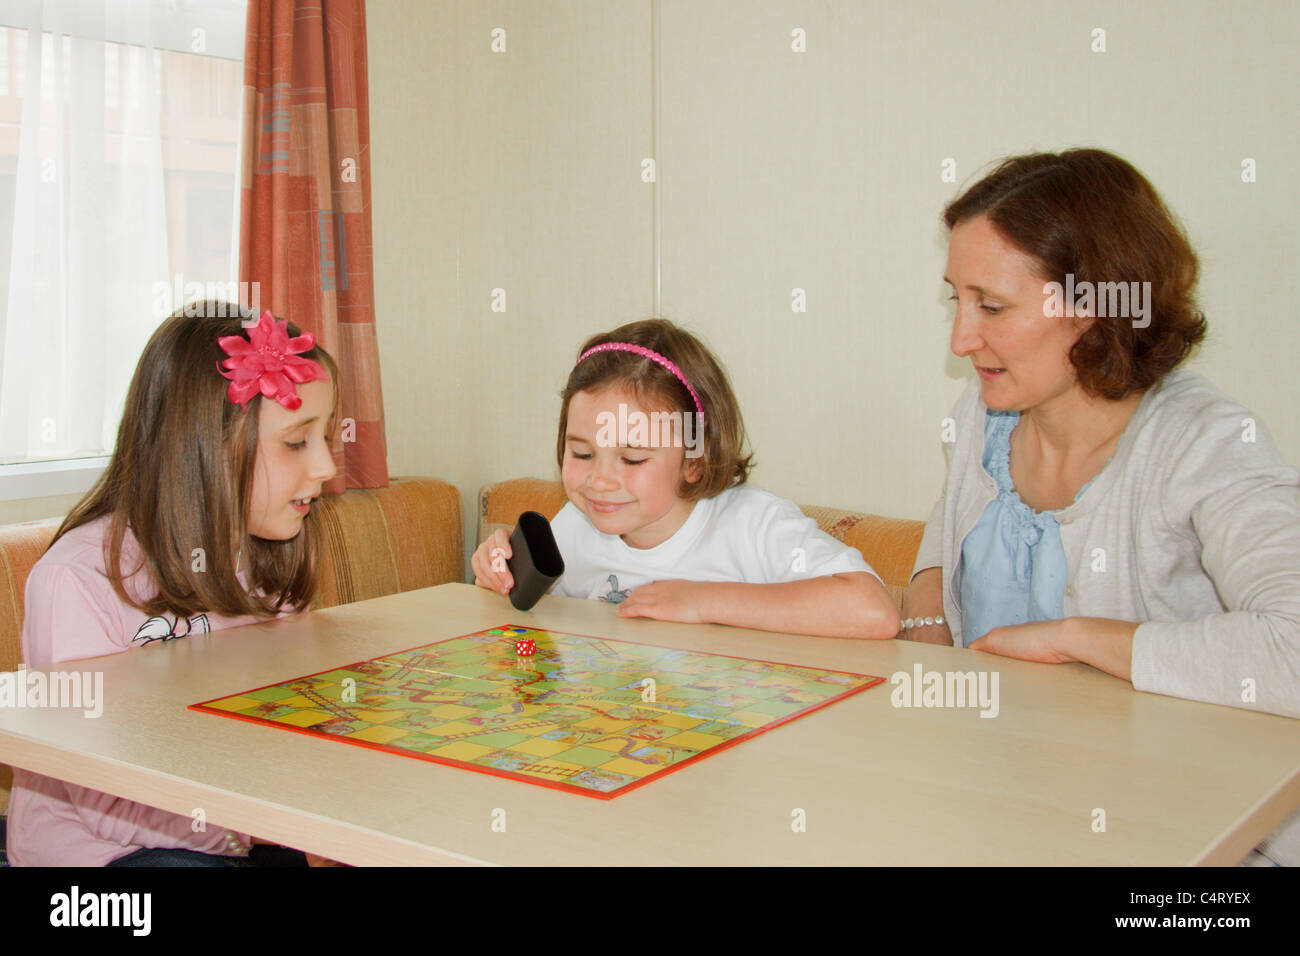 Family playing Snakes and Ladders en caravane Banque D'Images